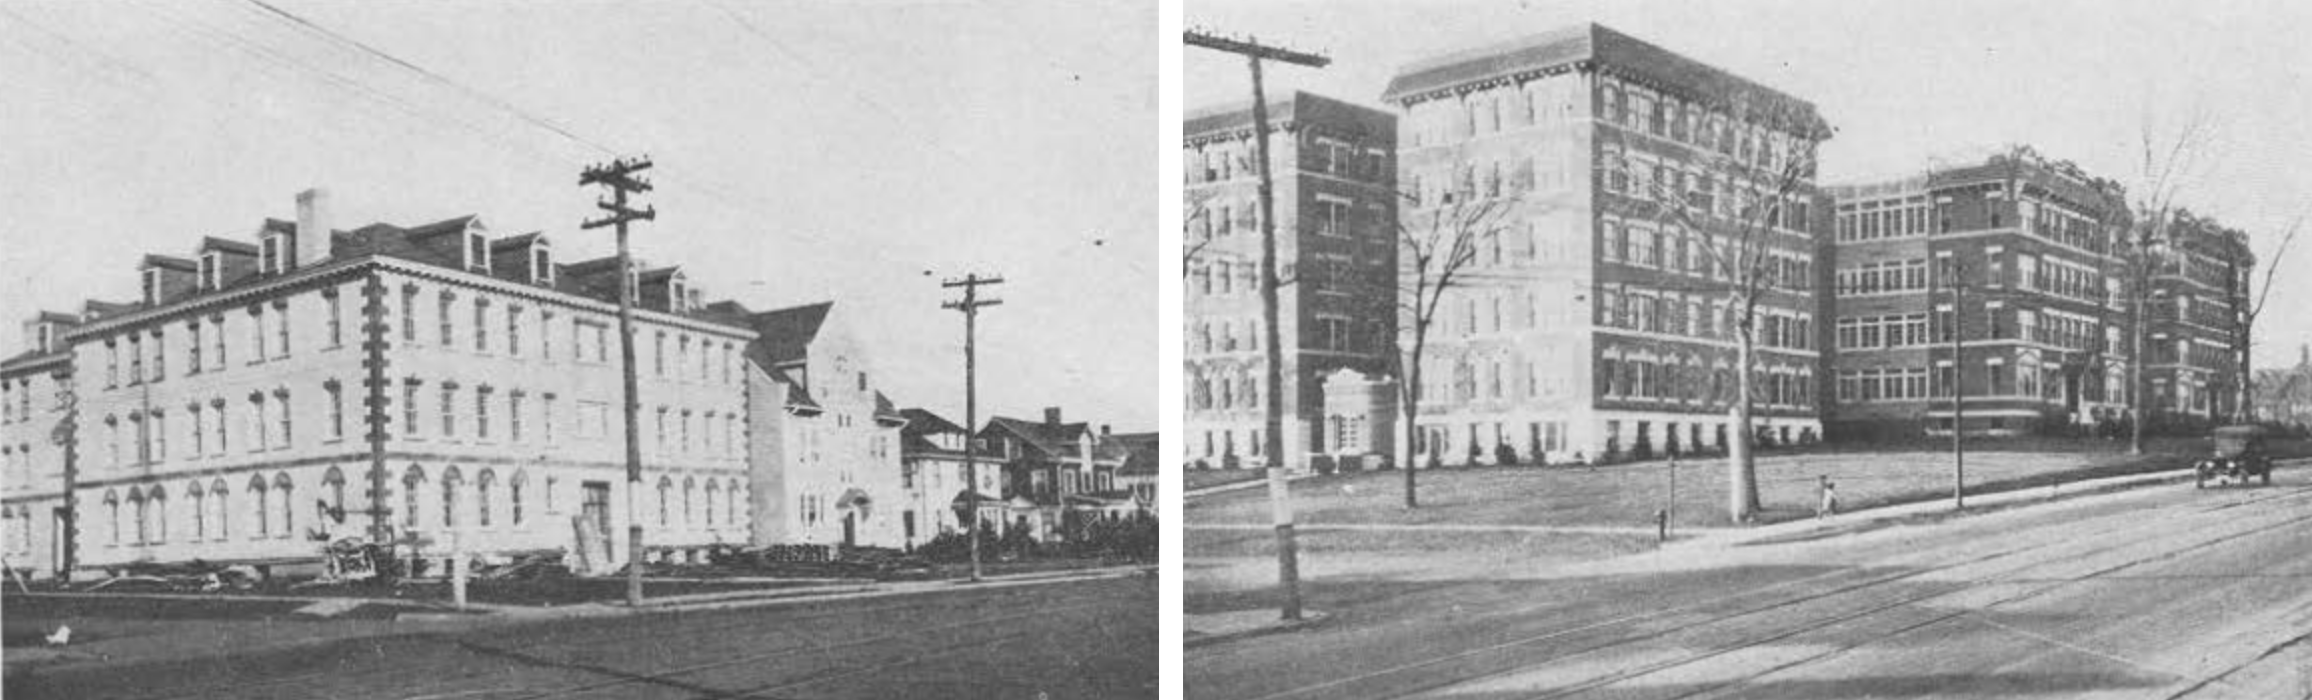 The 1924 West Hartford Zoning report warned that “large apartment houses are spreading farther west along Farmington Avenue” from the city into the suburb, where town leaders and their zoning experts believed single-family homes belonged. On the right side is The Packard, originally designed by Jewish builders to become upscale apartments.